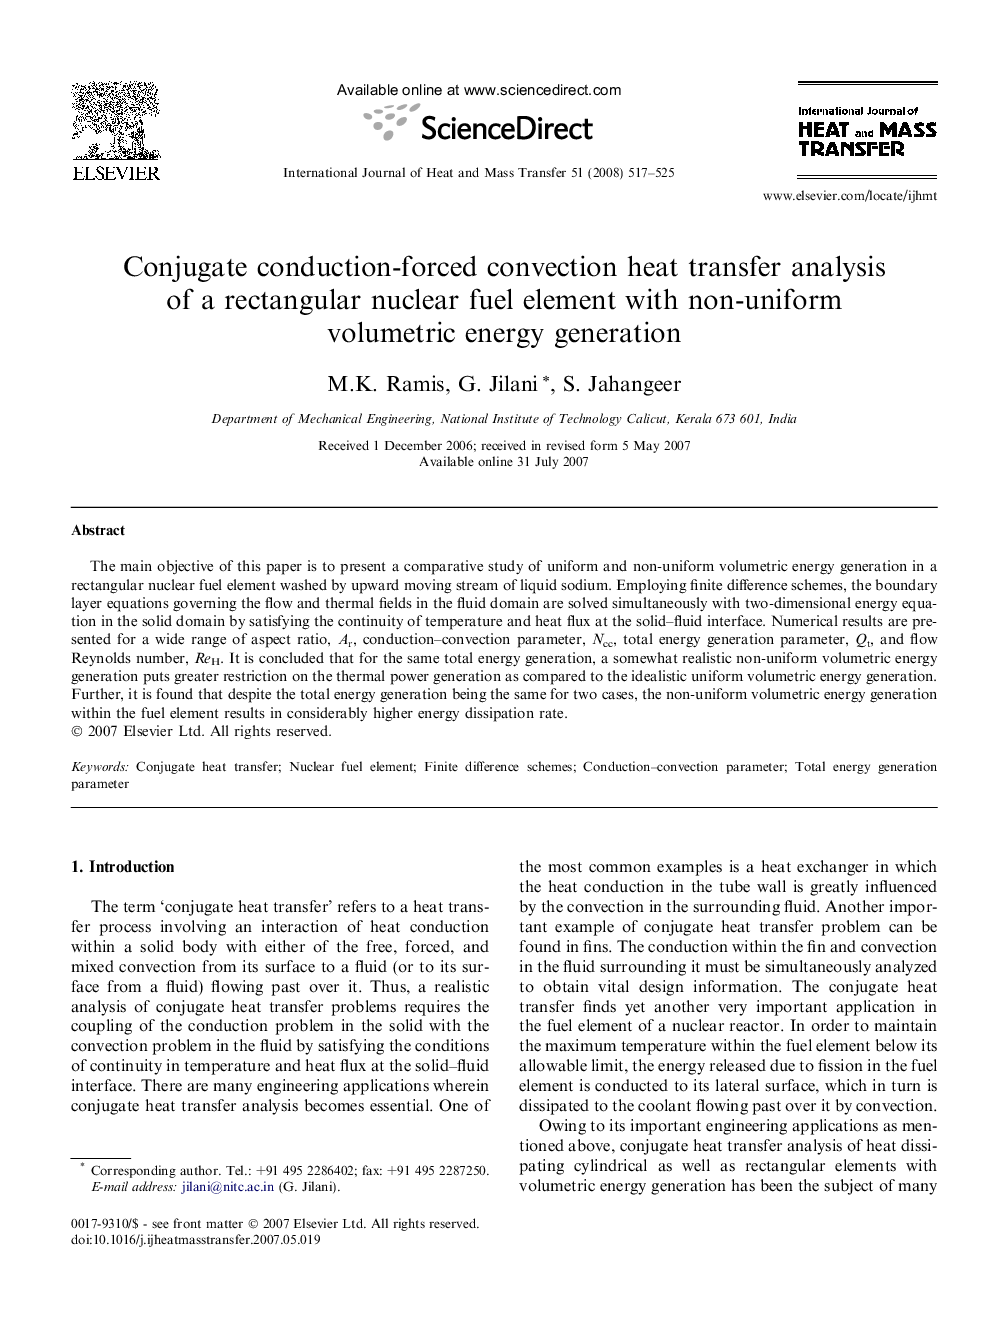 Conjugate conduction-forced convection heat transfer analysis of a rectangular nuclear fuel element with non-uniform volumetric energy generation